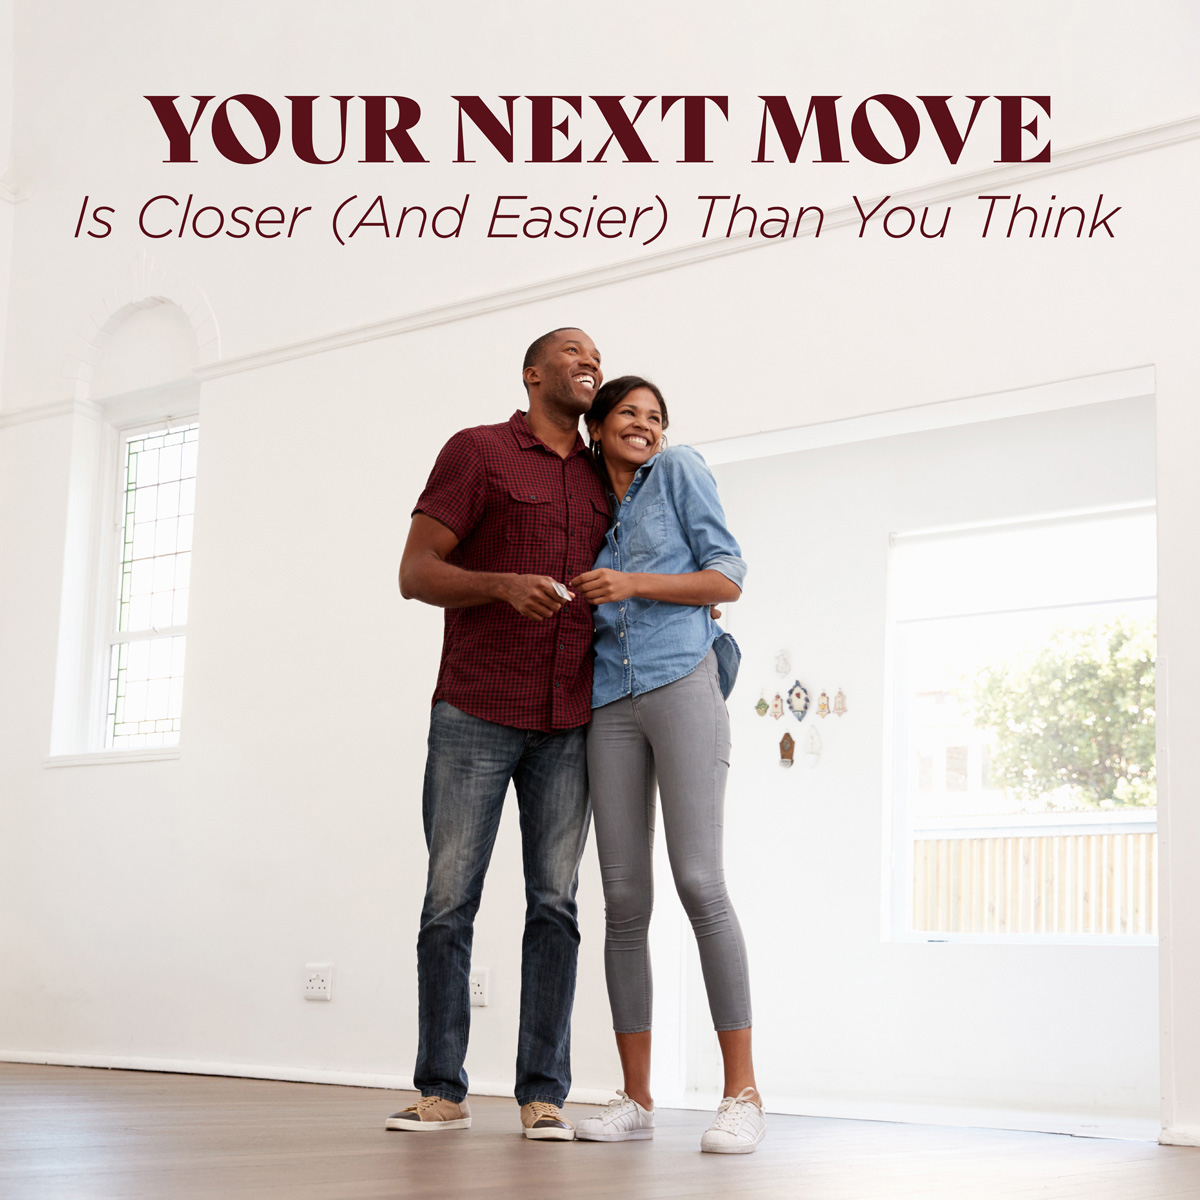 Looking for a new home? 🏠 We offer hundreds of mortgage products for lower rates and faster closings. Don't wait! 🏡💰 

🐺🐺🐺🐺
#Loanwolflending
#Mortgagebroker
#Homeloanswithabite
#Abetterbreedofhomeloans